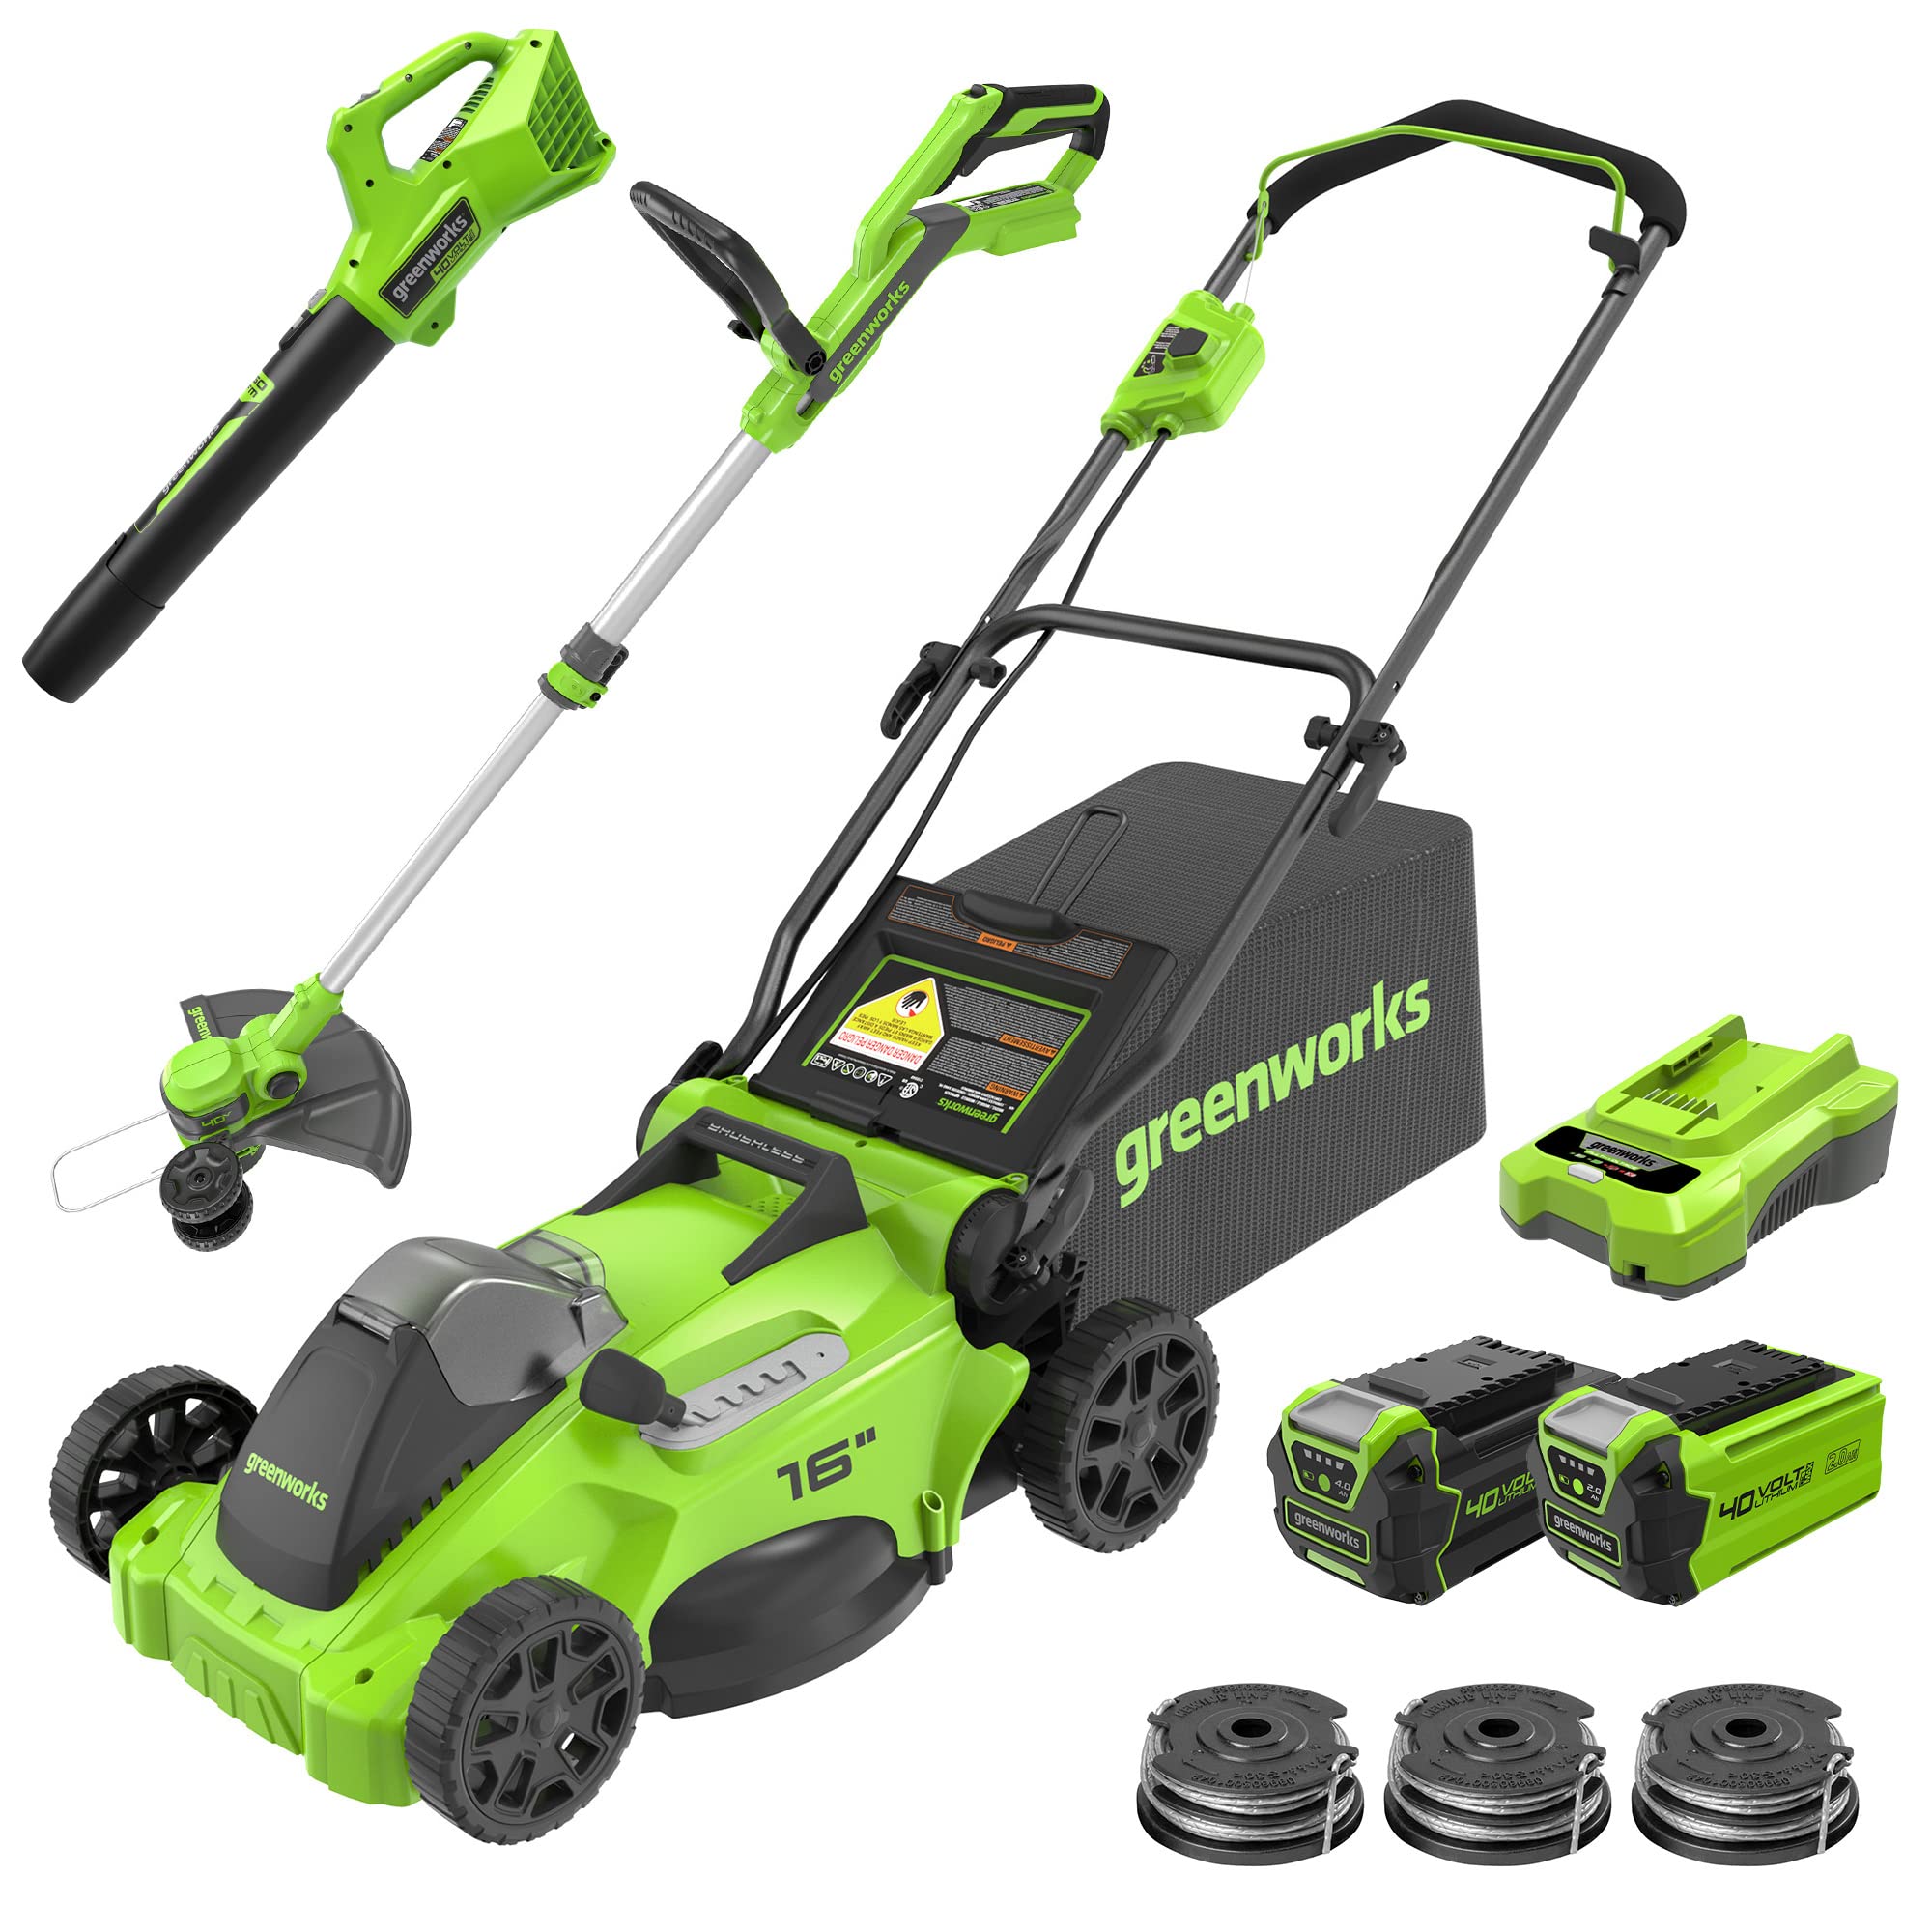 greenworkstools-40V 16 Cordless Battery Push Lawn Mower, 350CFM Blower & 13 String Trimmer Combo Kit w/ 4Ah Battery,2Ah Battery & Charger 